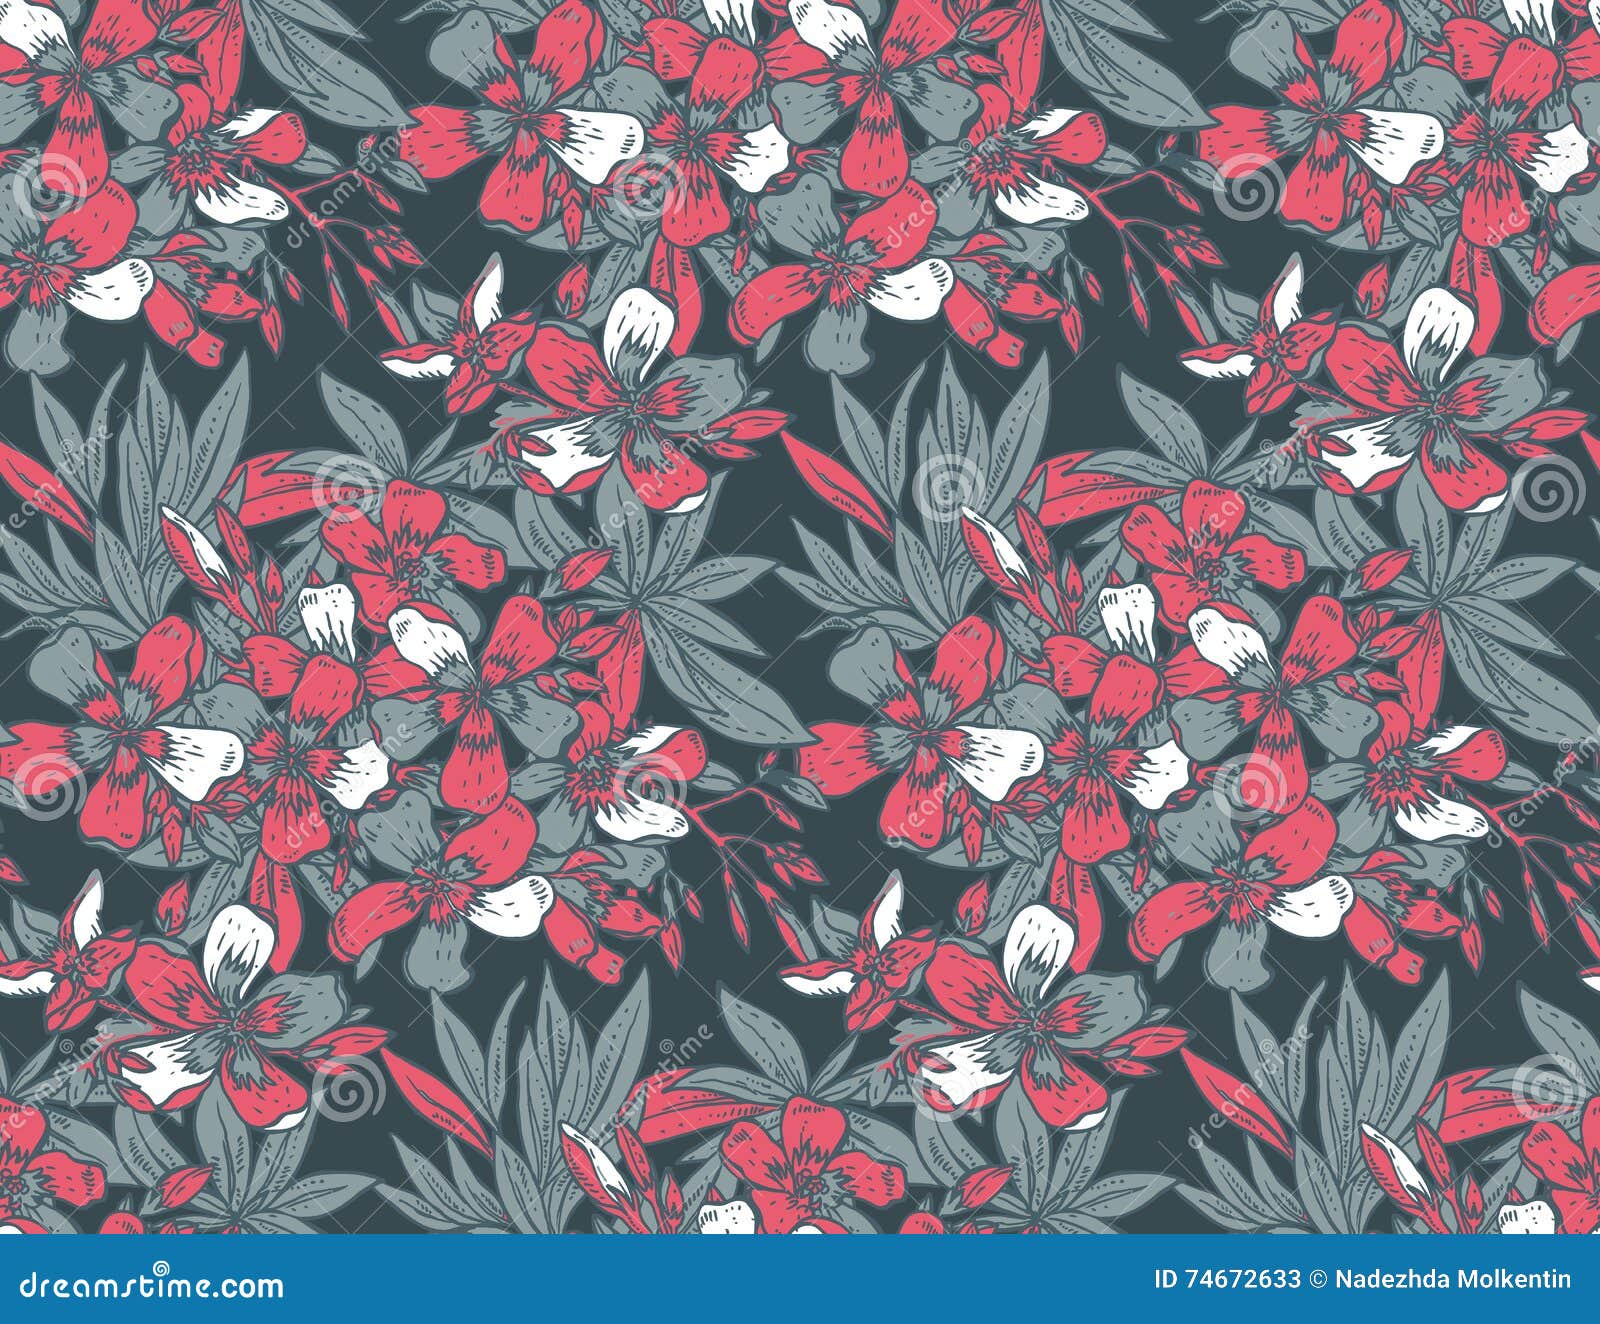  seamless pattern with hand drawn rhododendron flowers